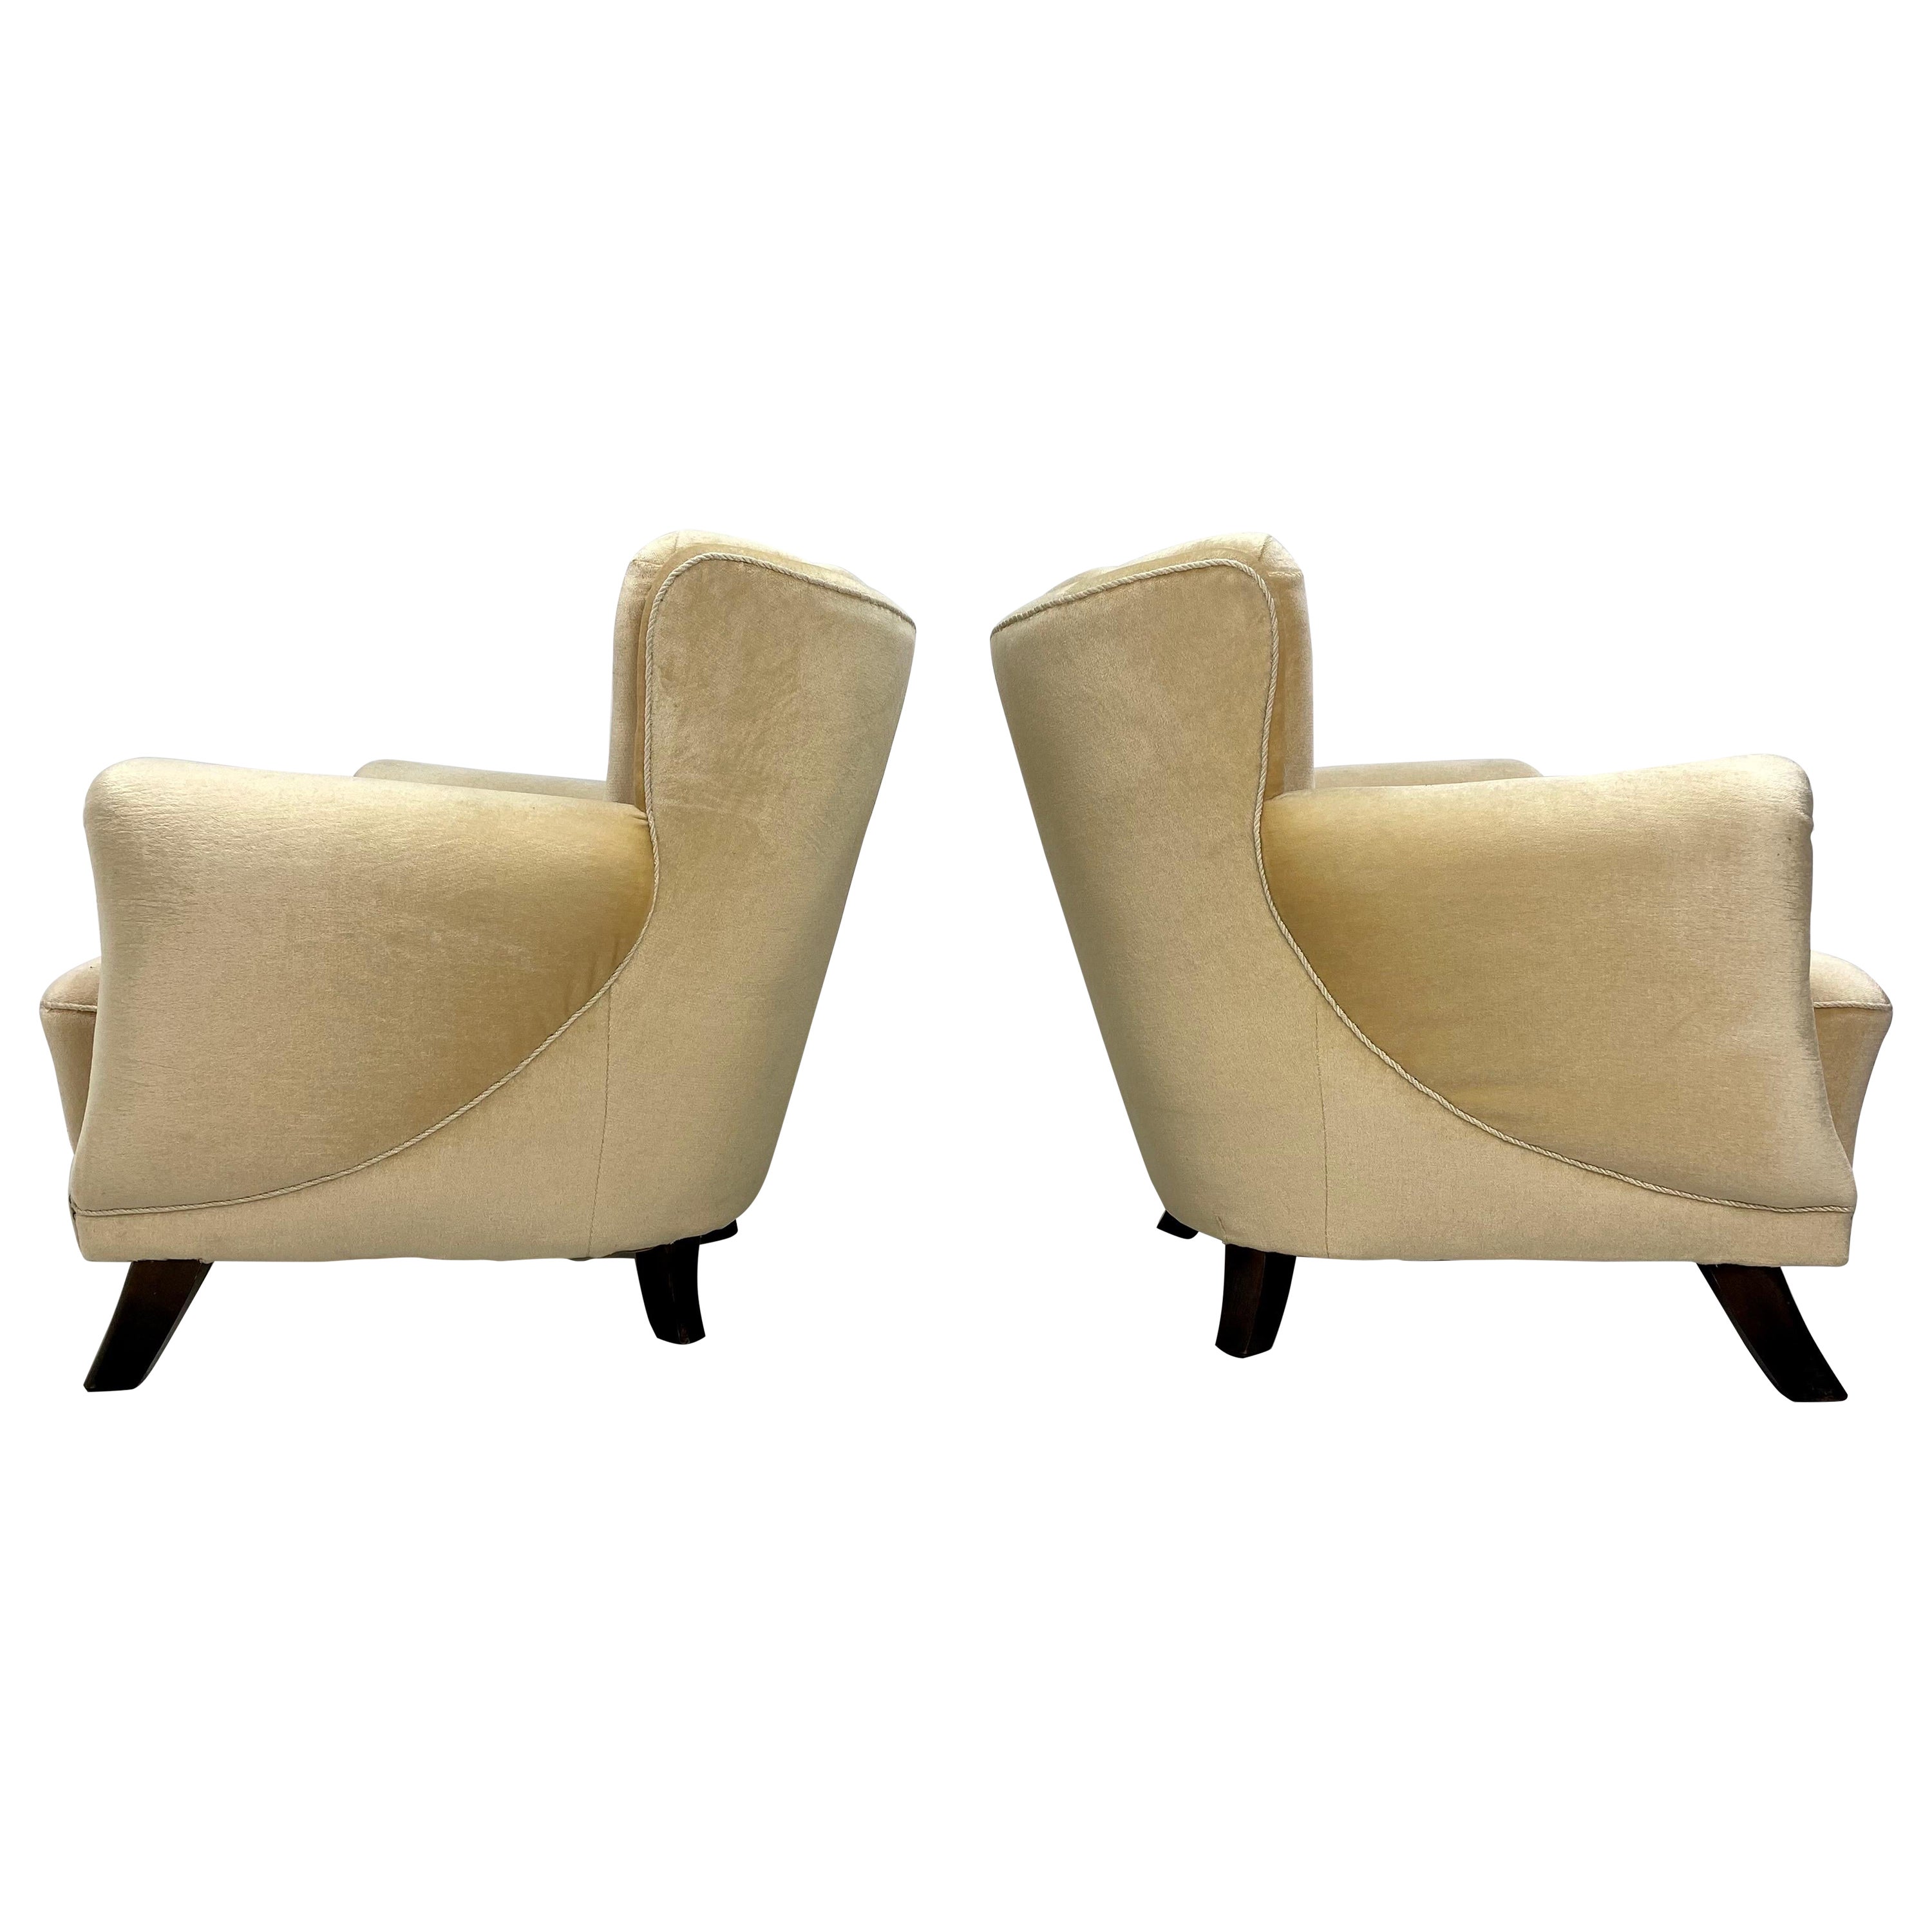 Pair of 1930s Swedish Lounge Chairs For Sale